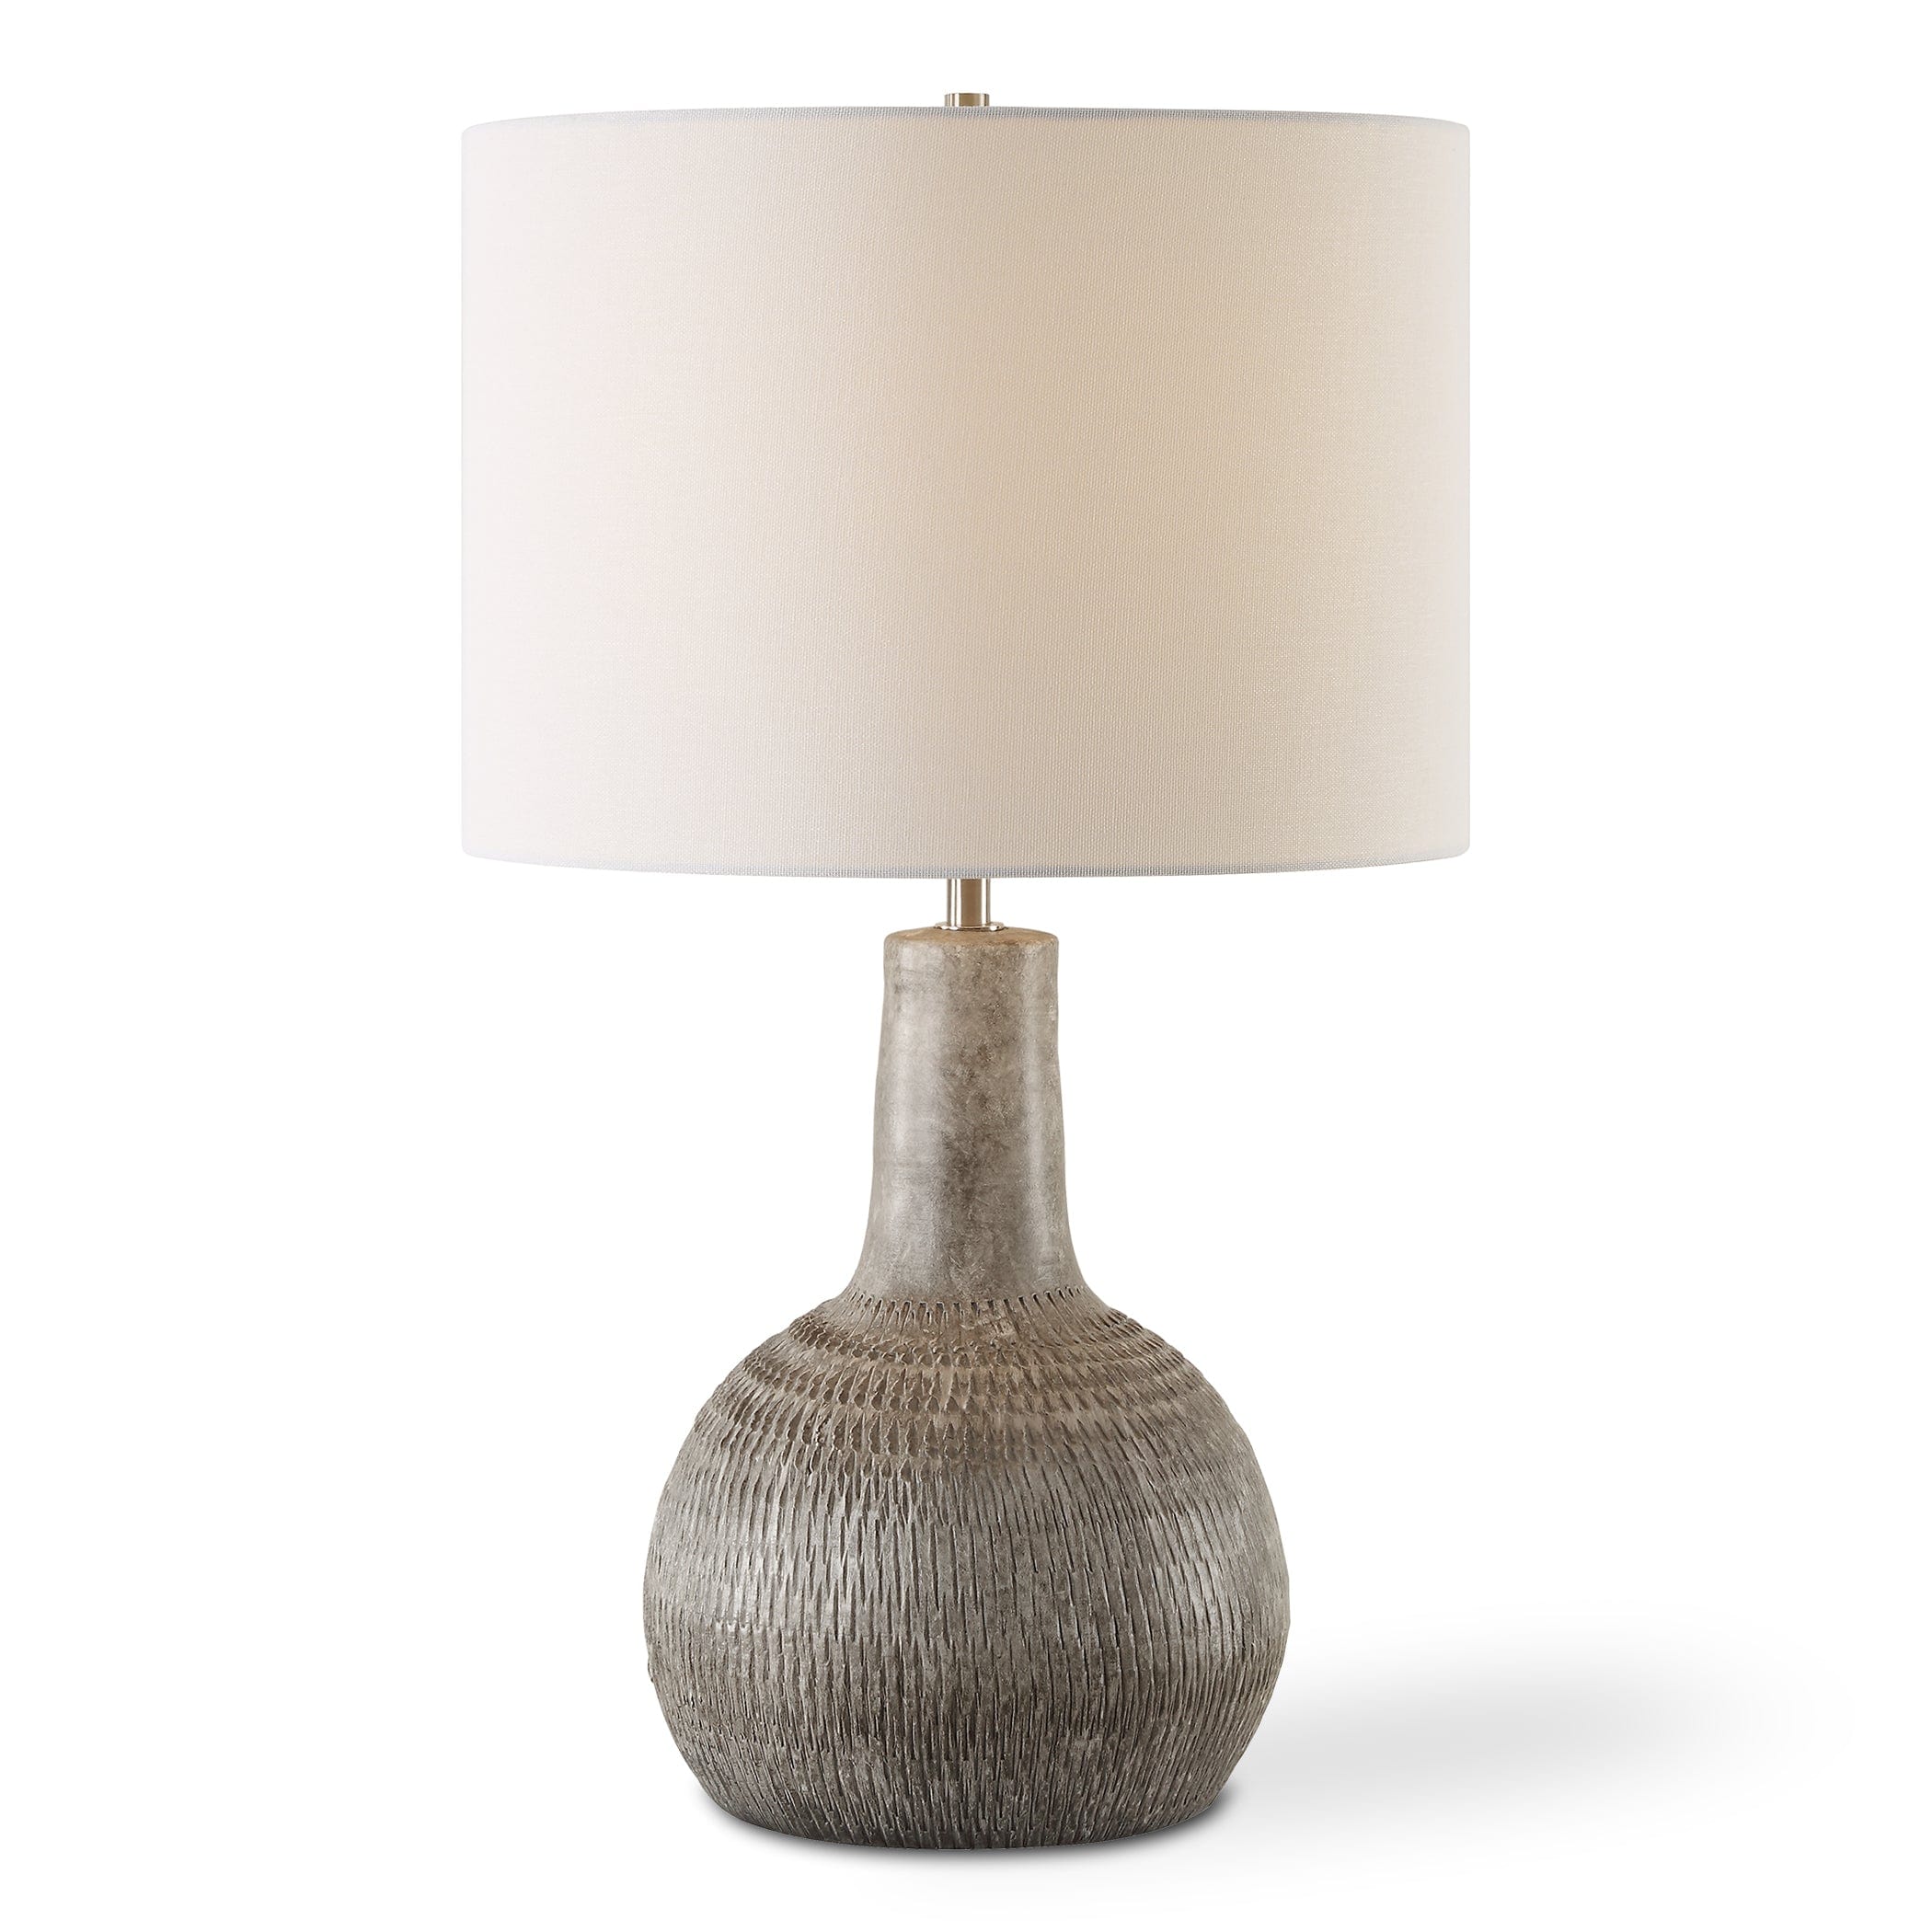 TABLE LAMP WL-20 Uttermost